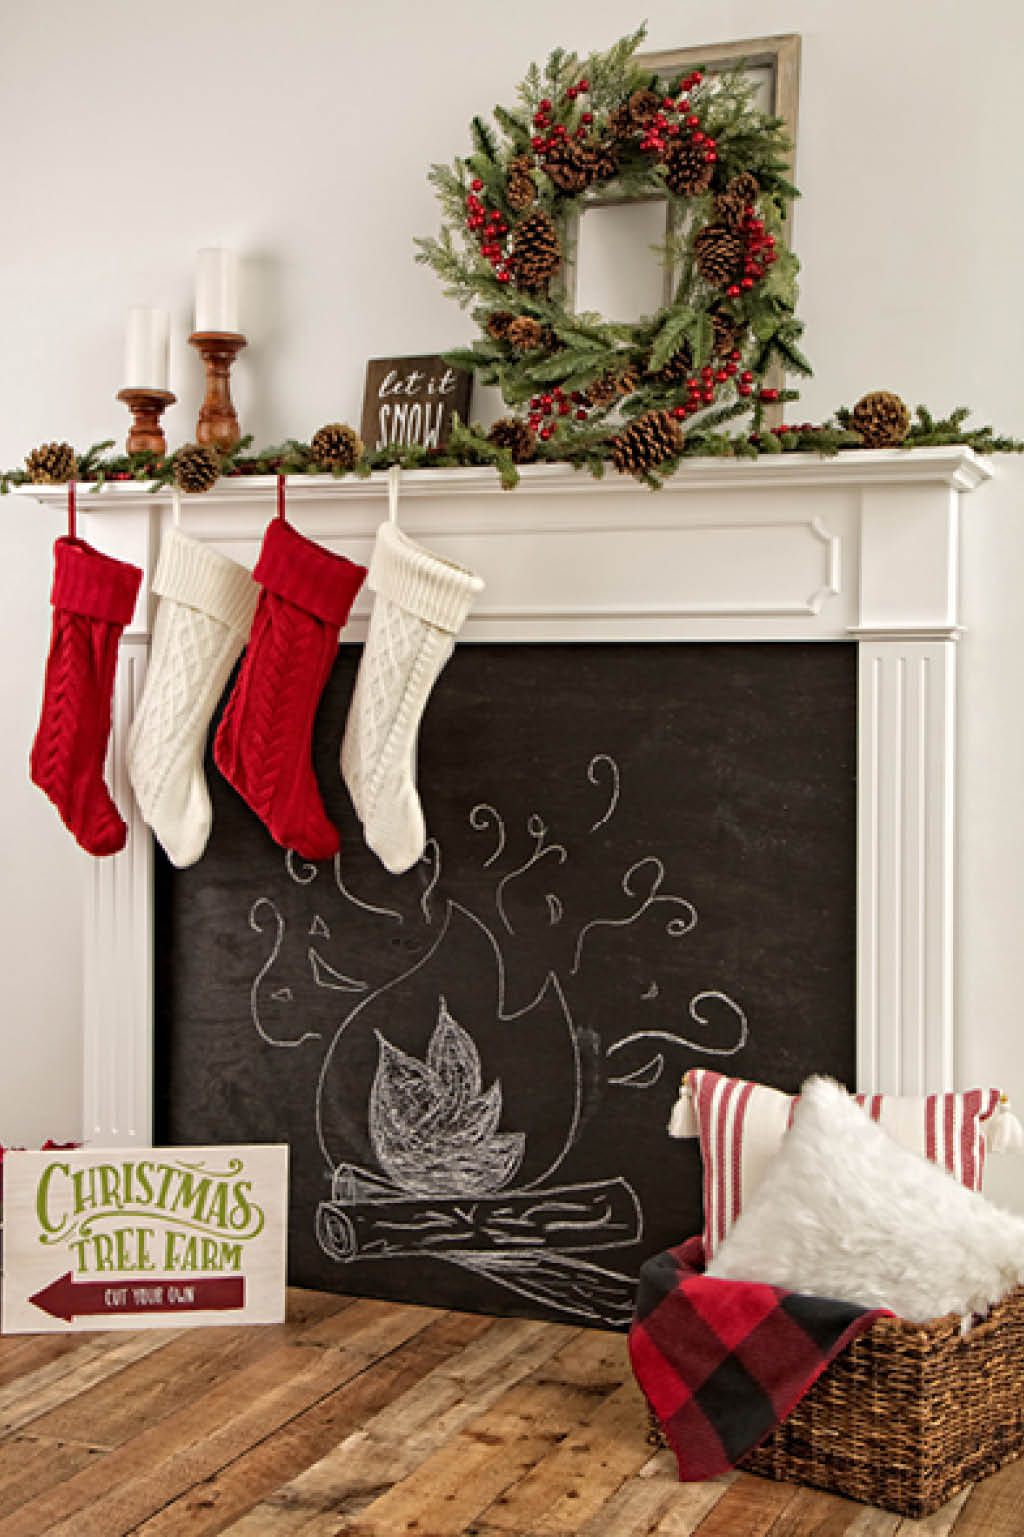 decorated-mantel-for-winter